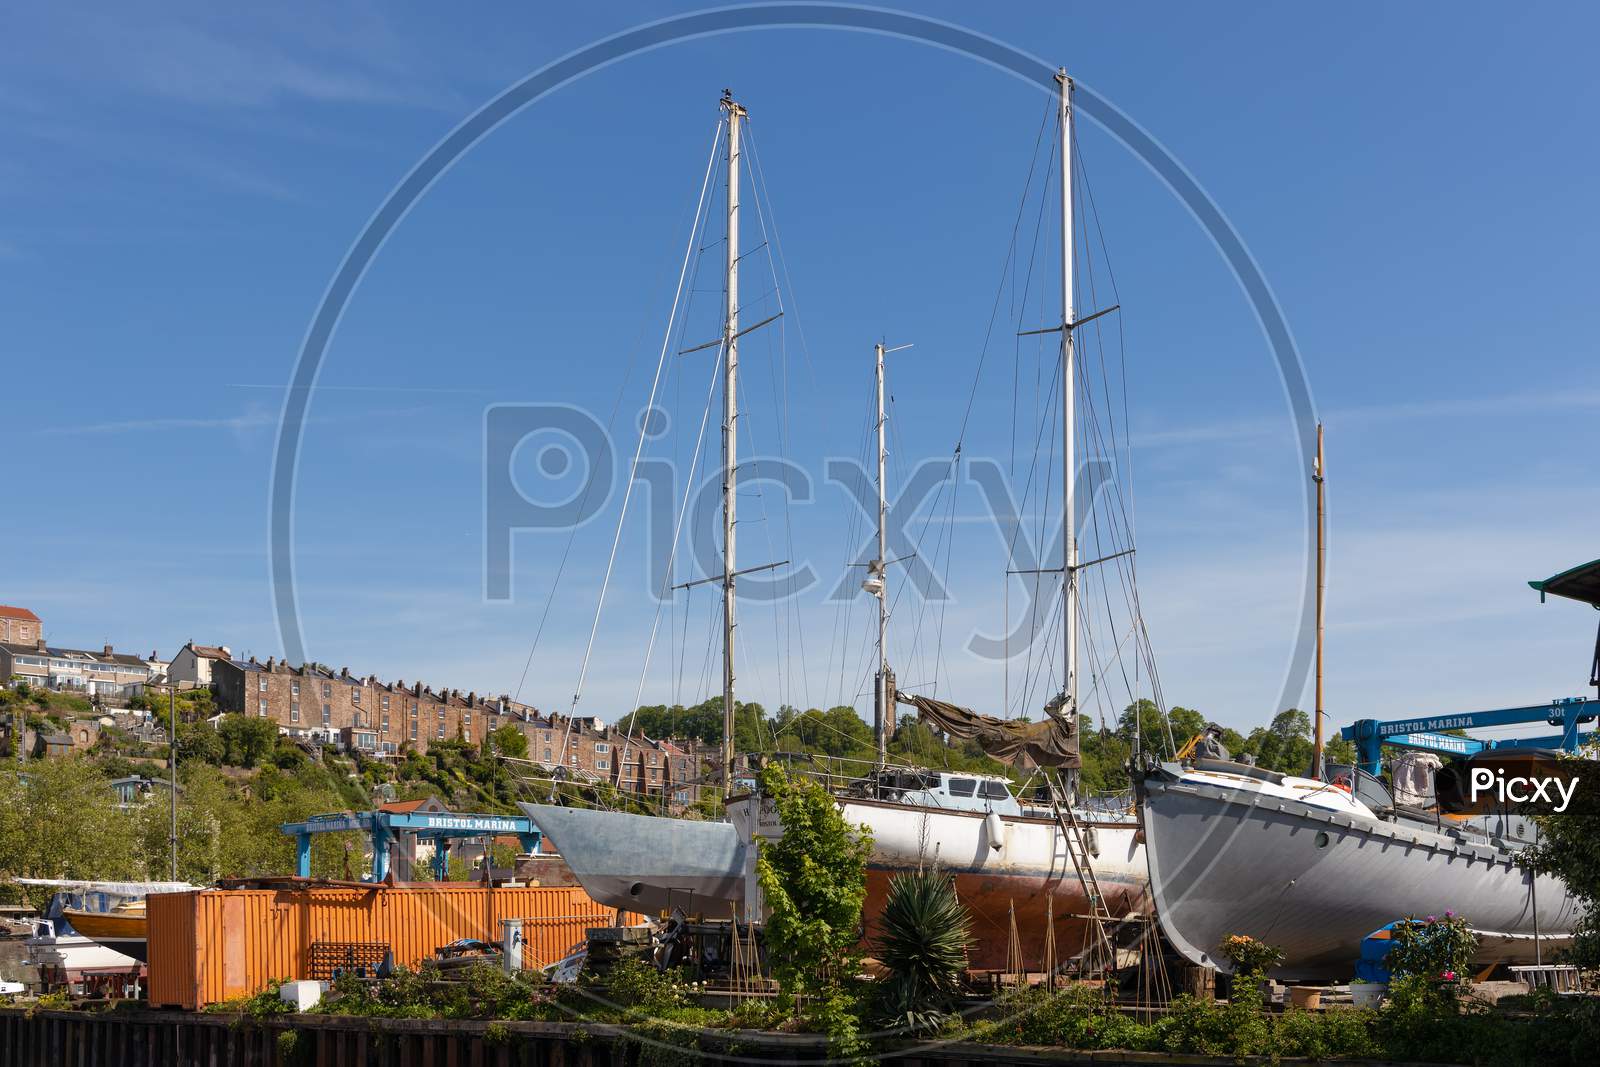 Bristol, Uk - May 14 : View Of Yachts Taken Out Of The River Avon In Bristol On May 14, 2019